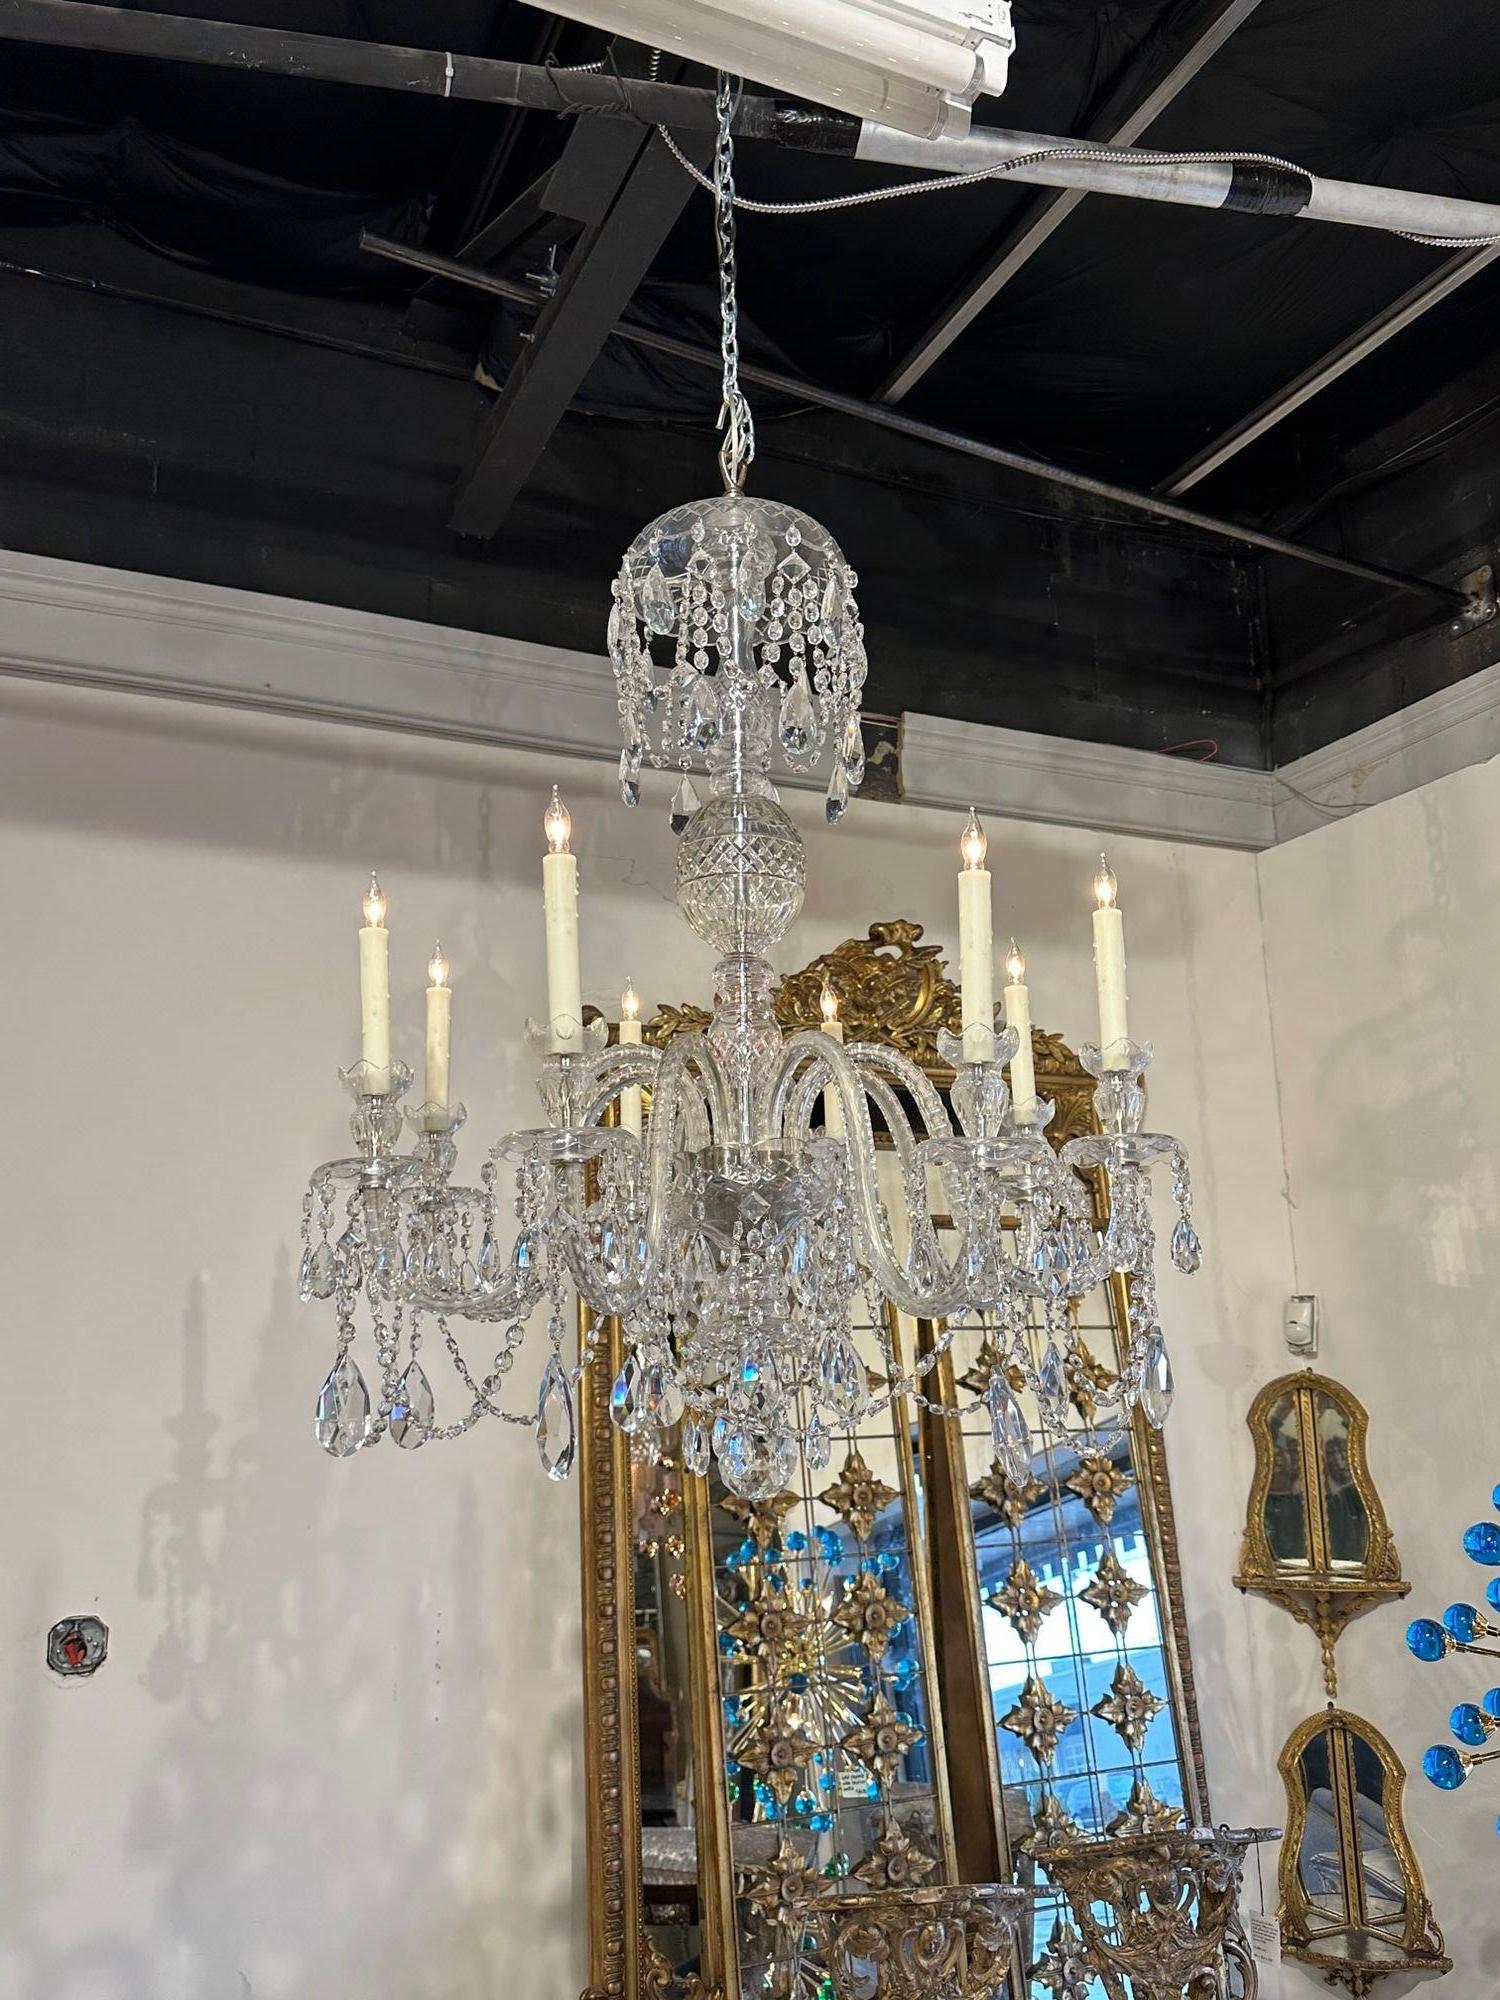 Gorgeous 19th century English Waterford style 8-light chandelier. circa 1900. The chandelier has been professionally rewired, comes with matching chain and canopy. It is ready to hang!